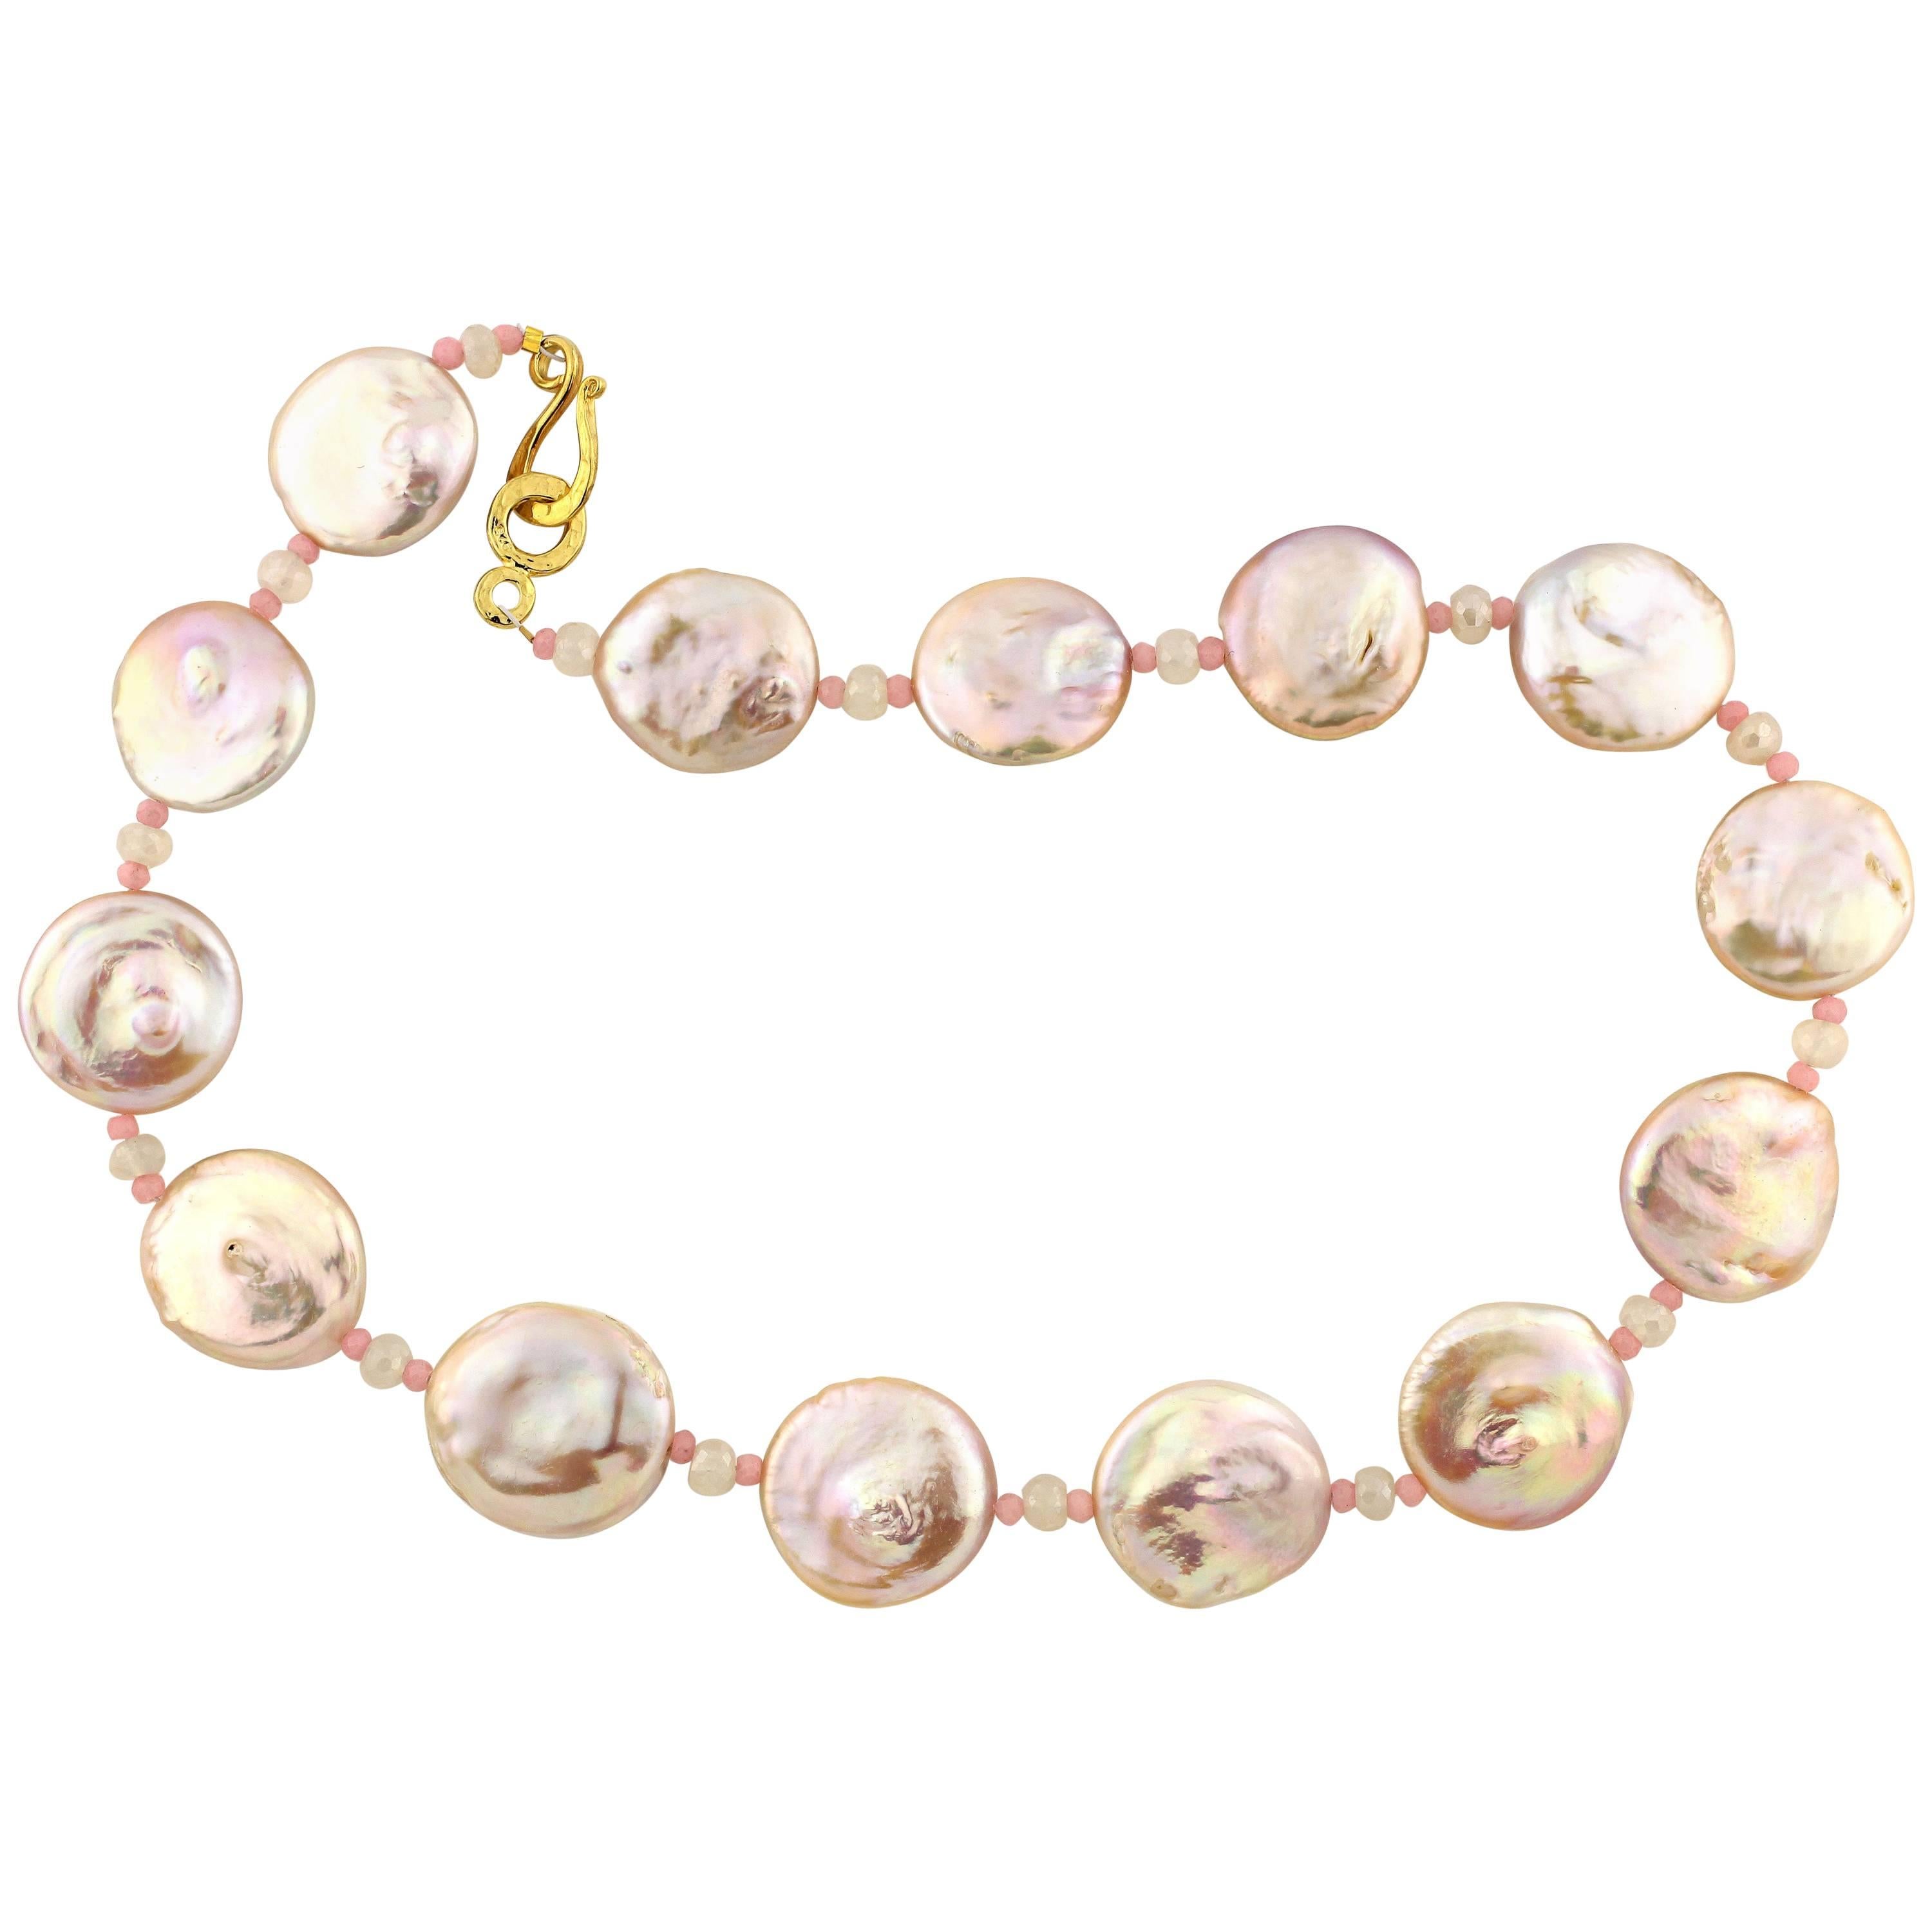 Gemjunky 17.25" Irridescent Natural Coin Pearl Pink Opal Moonstone Necklace